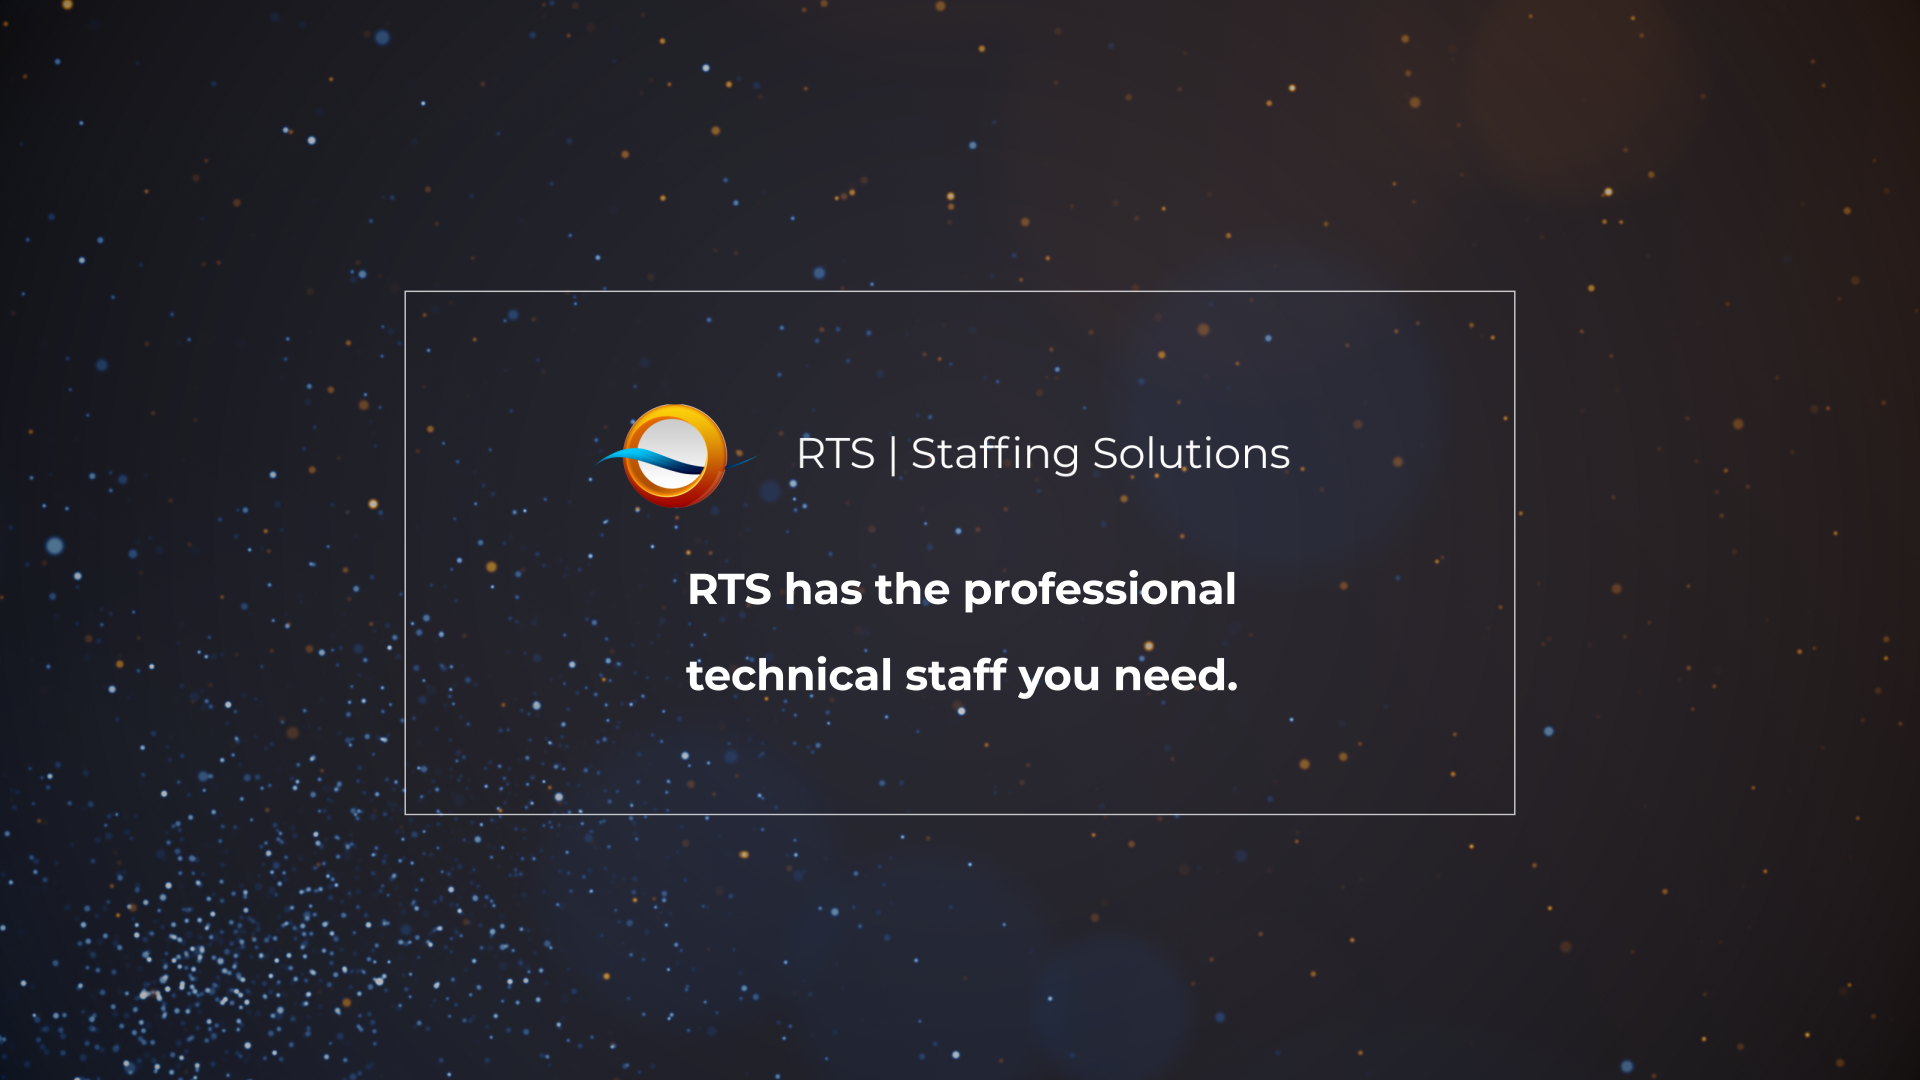 RTS Staffing Solutions has the professional technical staff you need